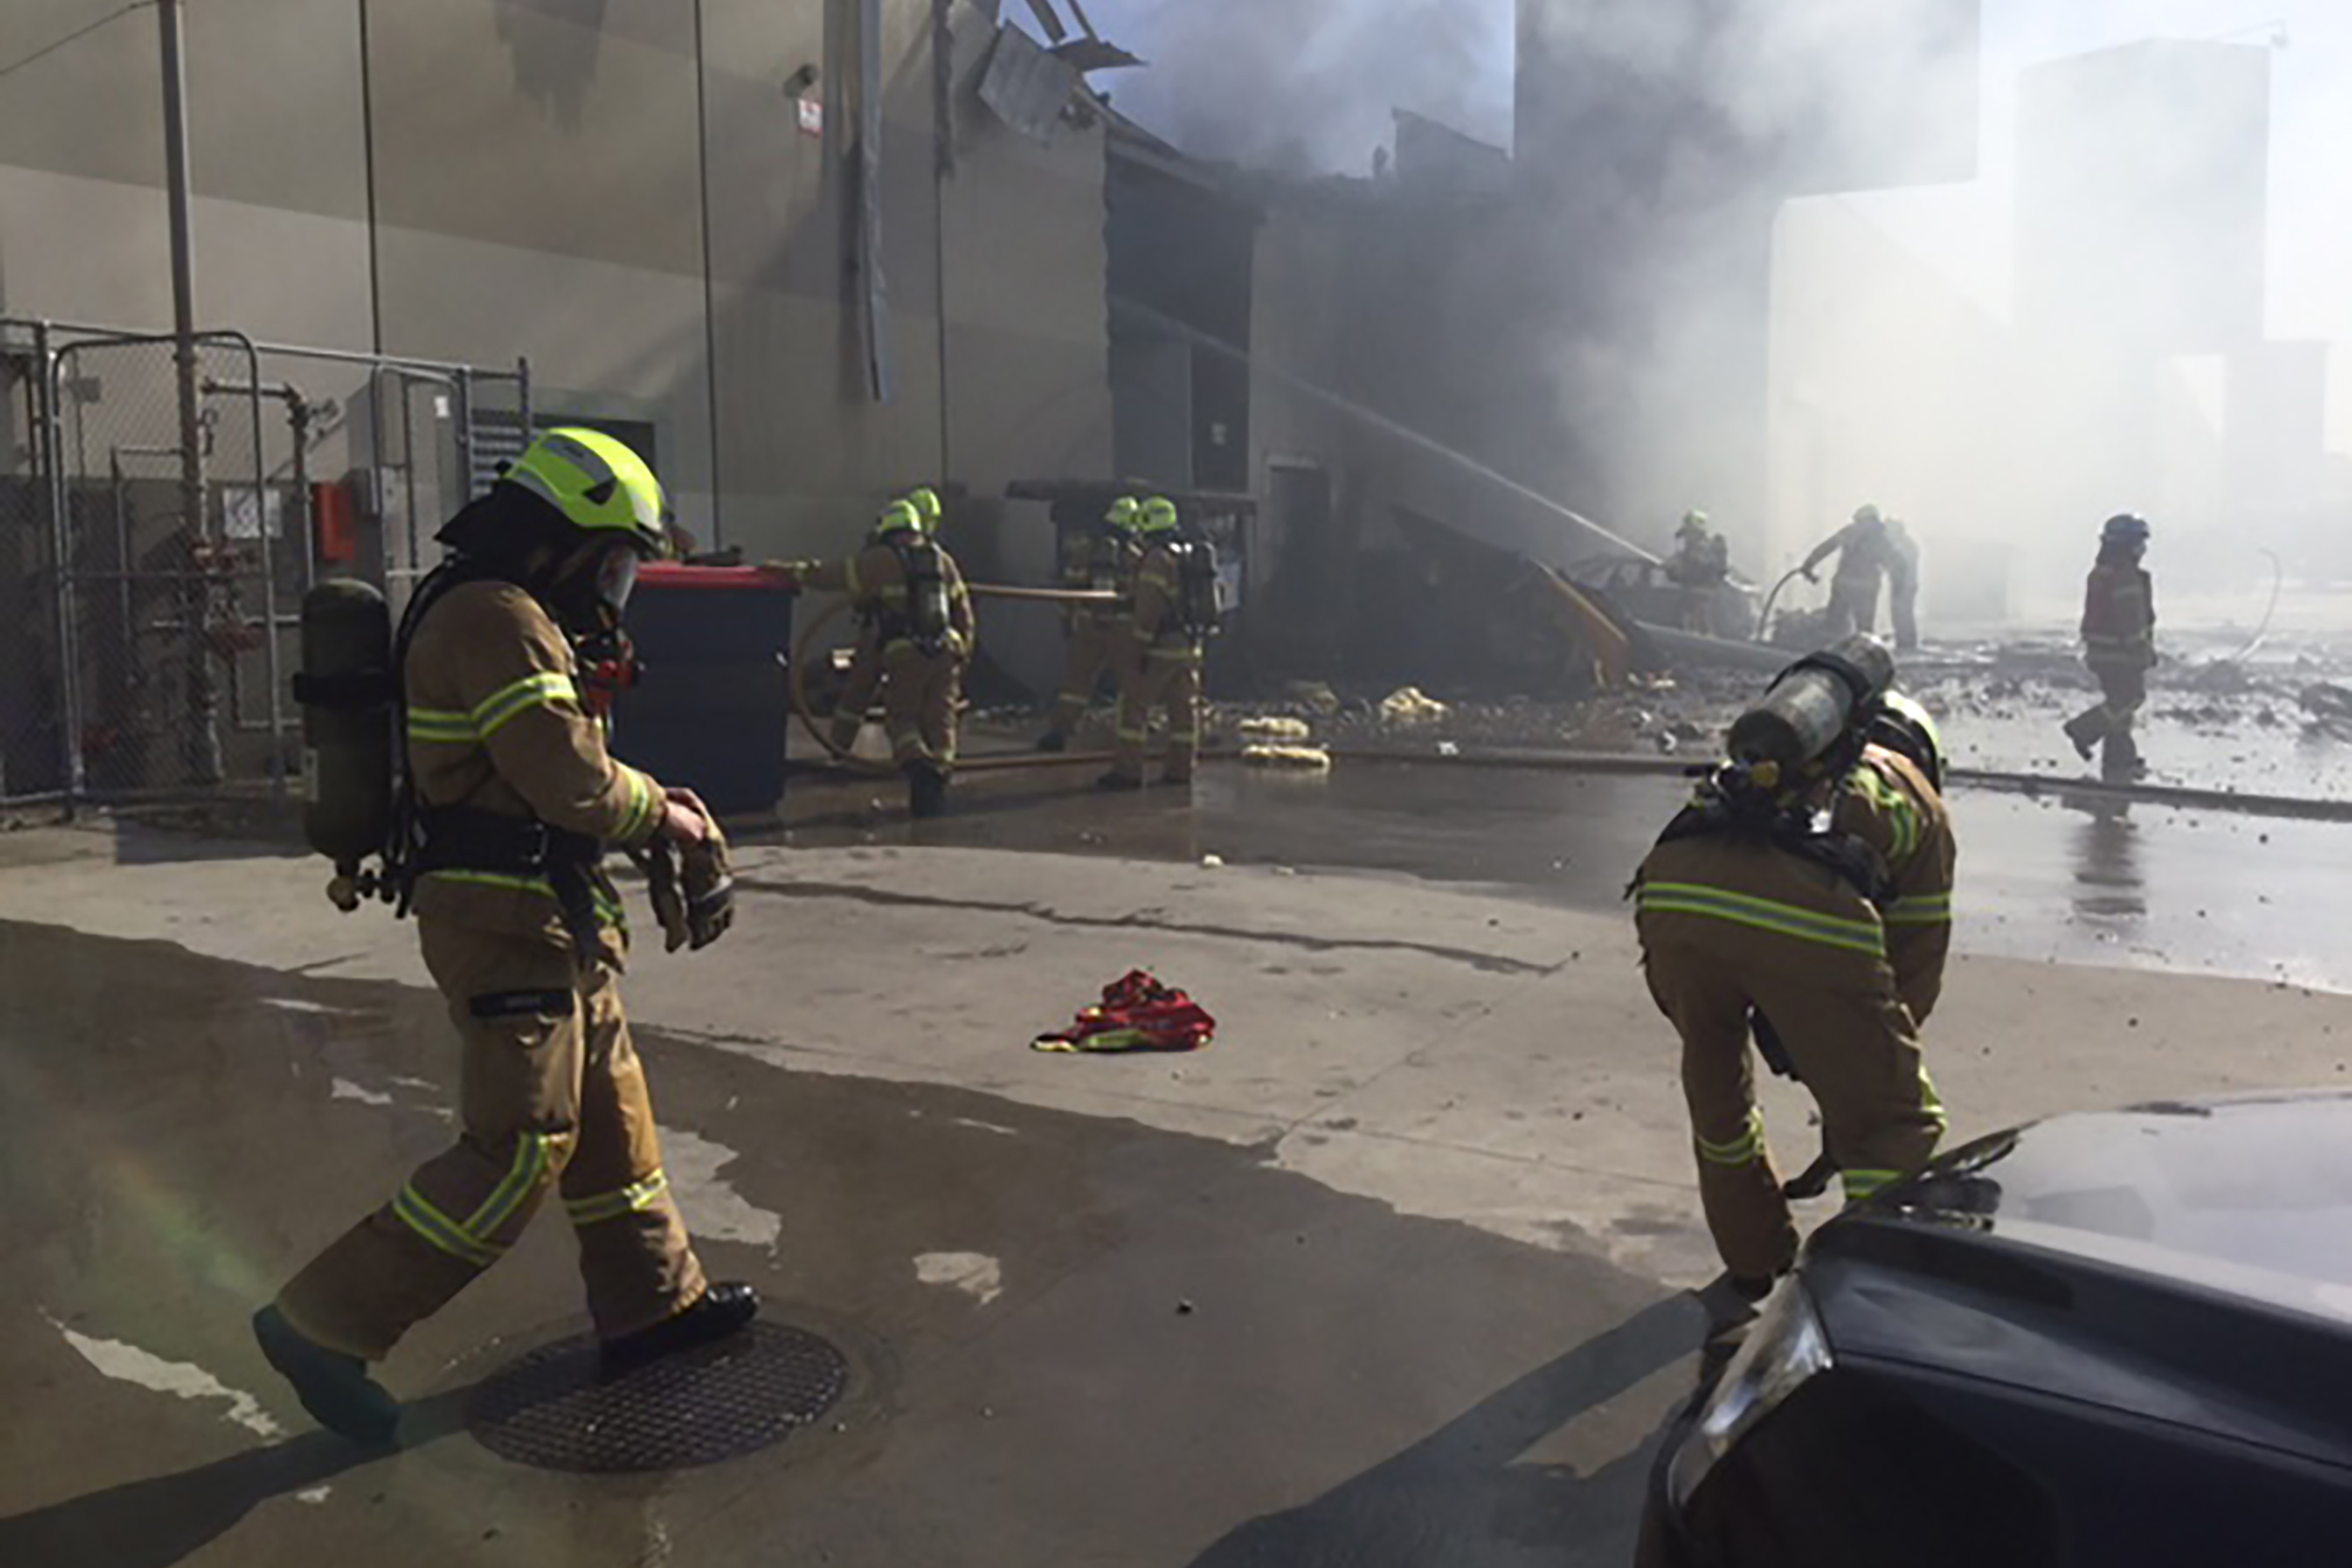 In pictures: Plane crashes into mall in Australia